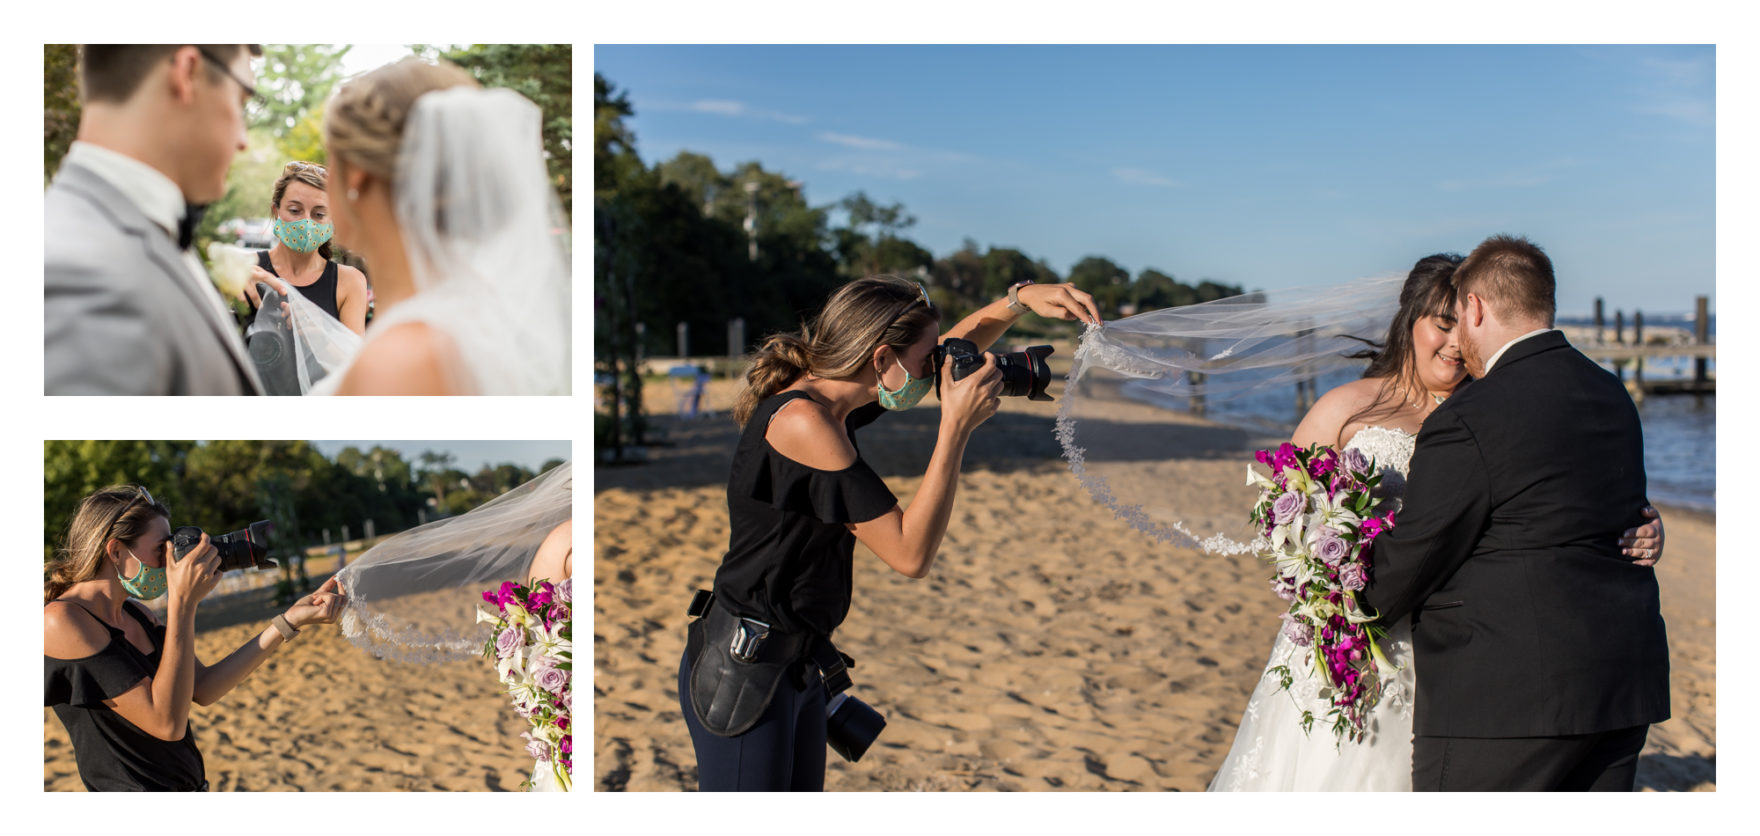 Wedding Photographer Behind the scenes. maryland wedding photographer. wedding veils. wedding dress. dress fluffing. second photographer 2020